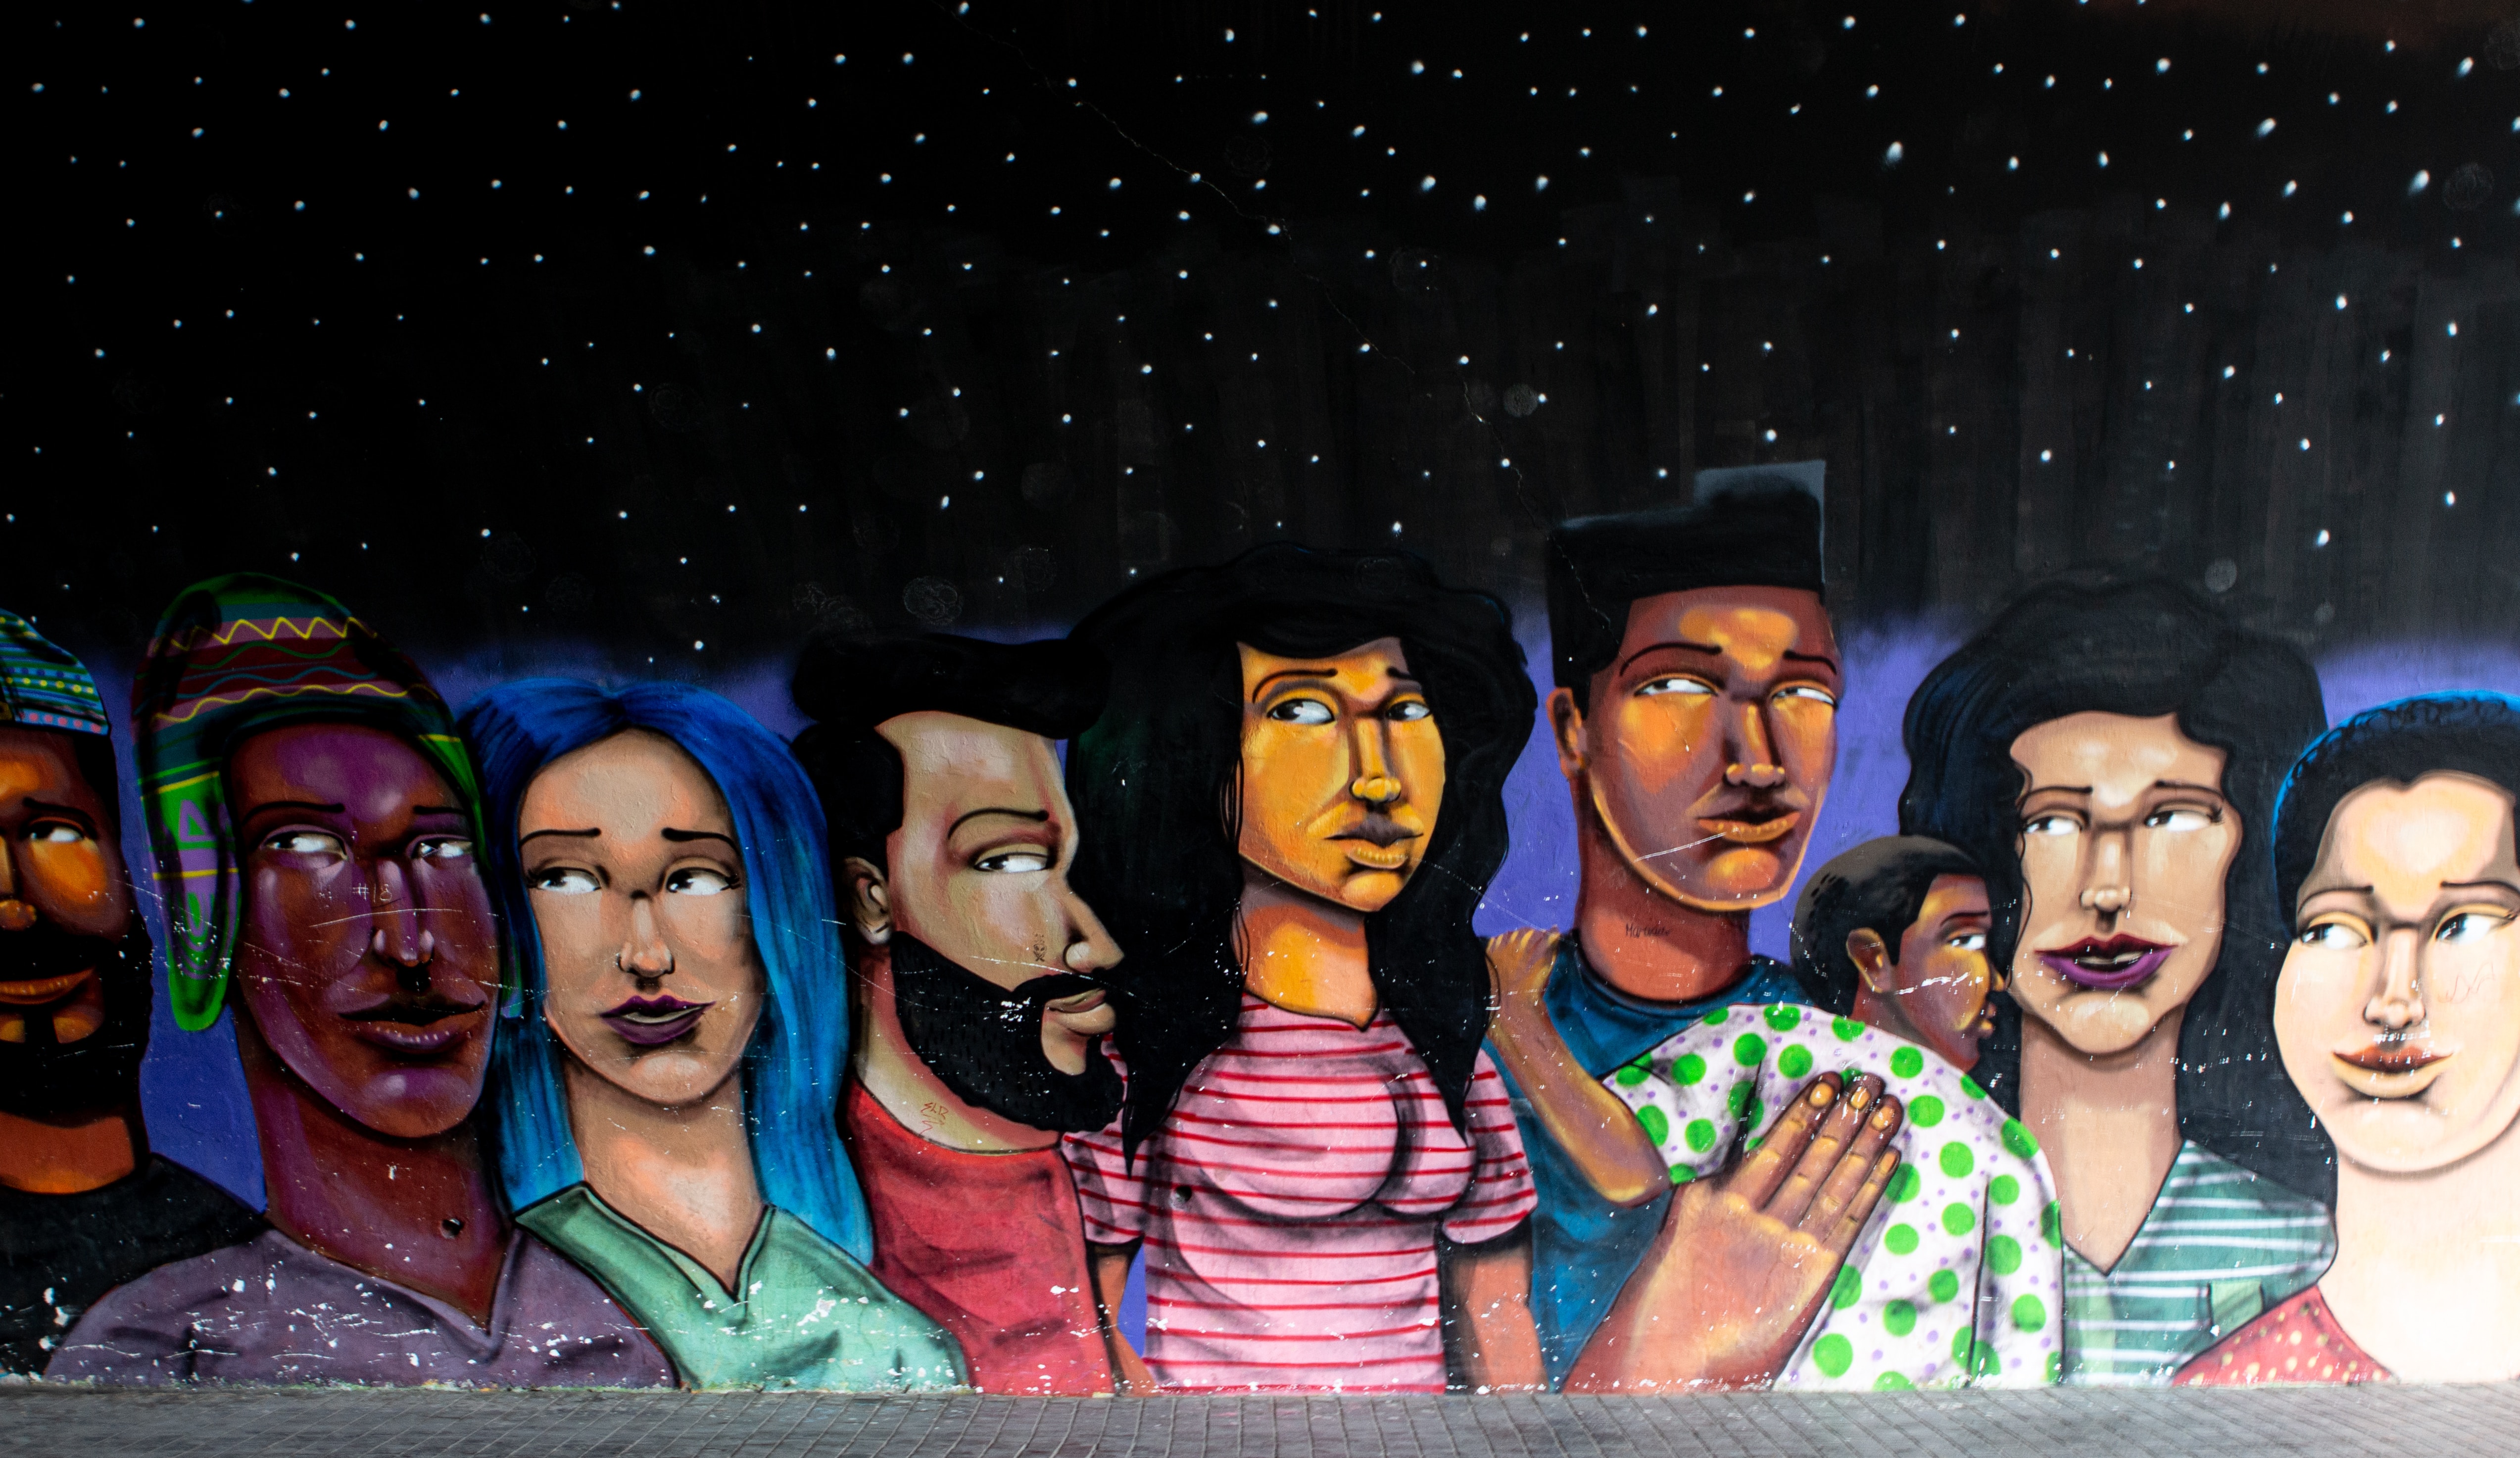 a mural depicting people gathered in a dimly lit room, showcasing unity and diversity